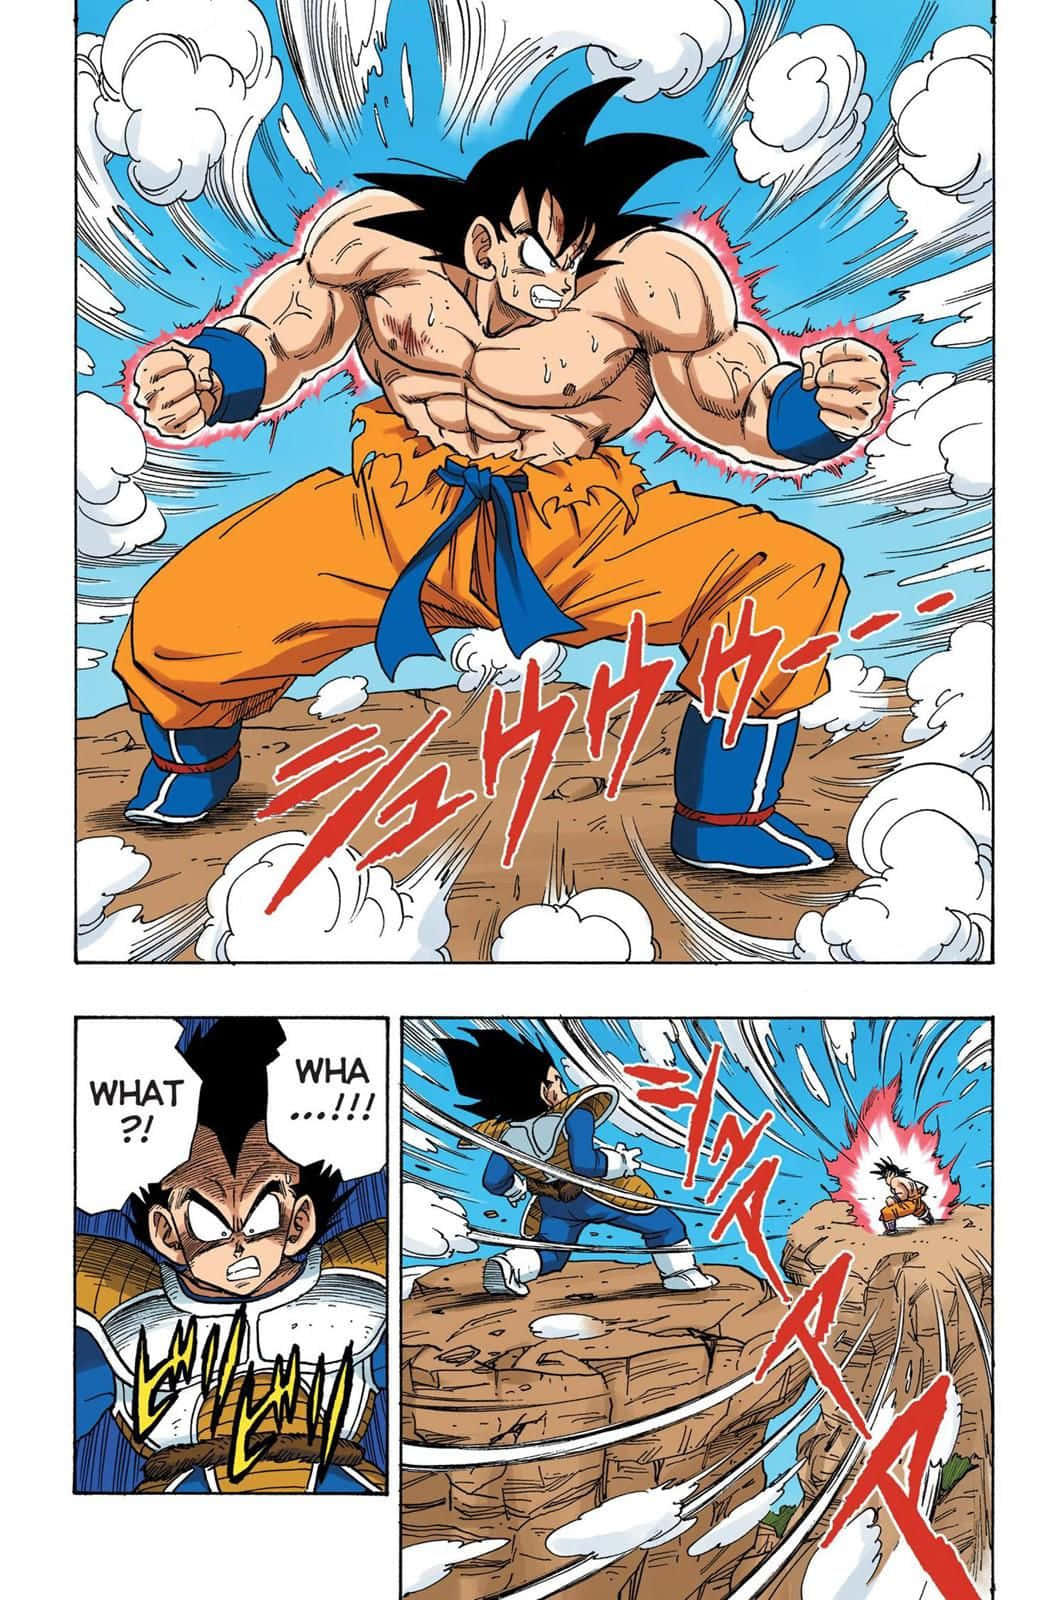 Exciting new adventures unfold in the manga of Dragon Ball Super Wallpaper